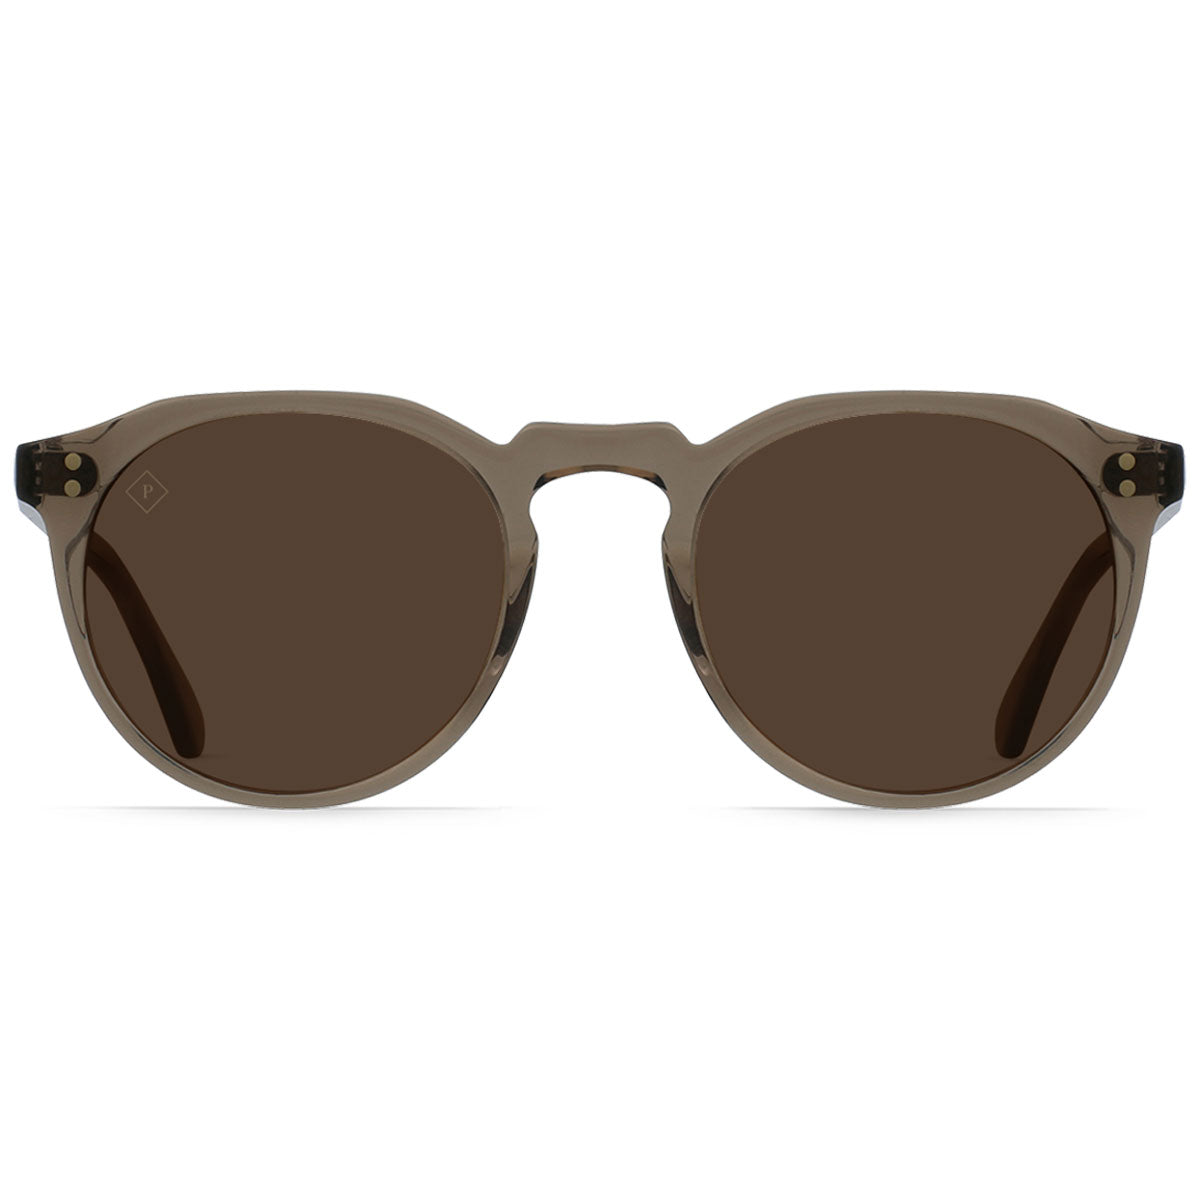 Raen Remmy 52 Sunglasses - Ghost/Vibrant Brown Polarized image 2